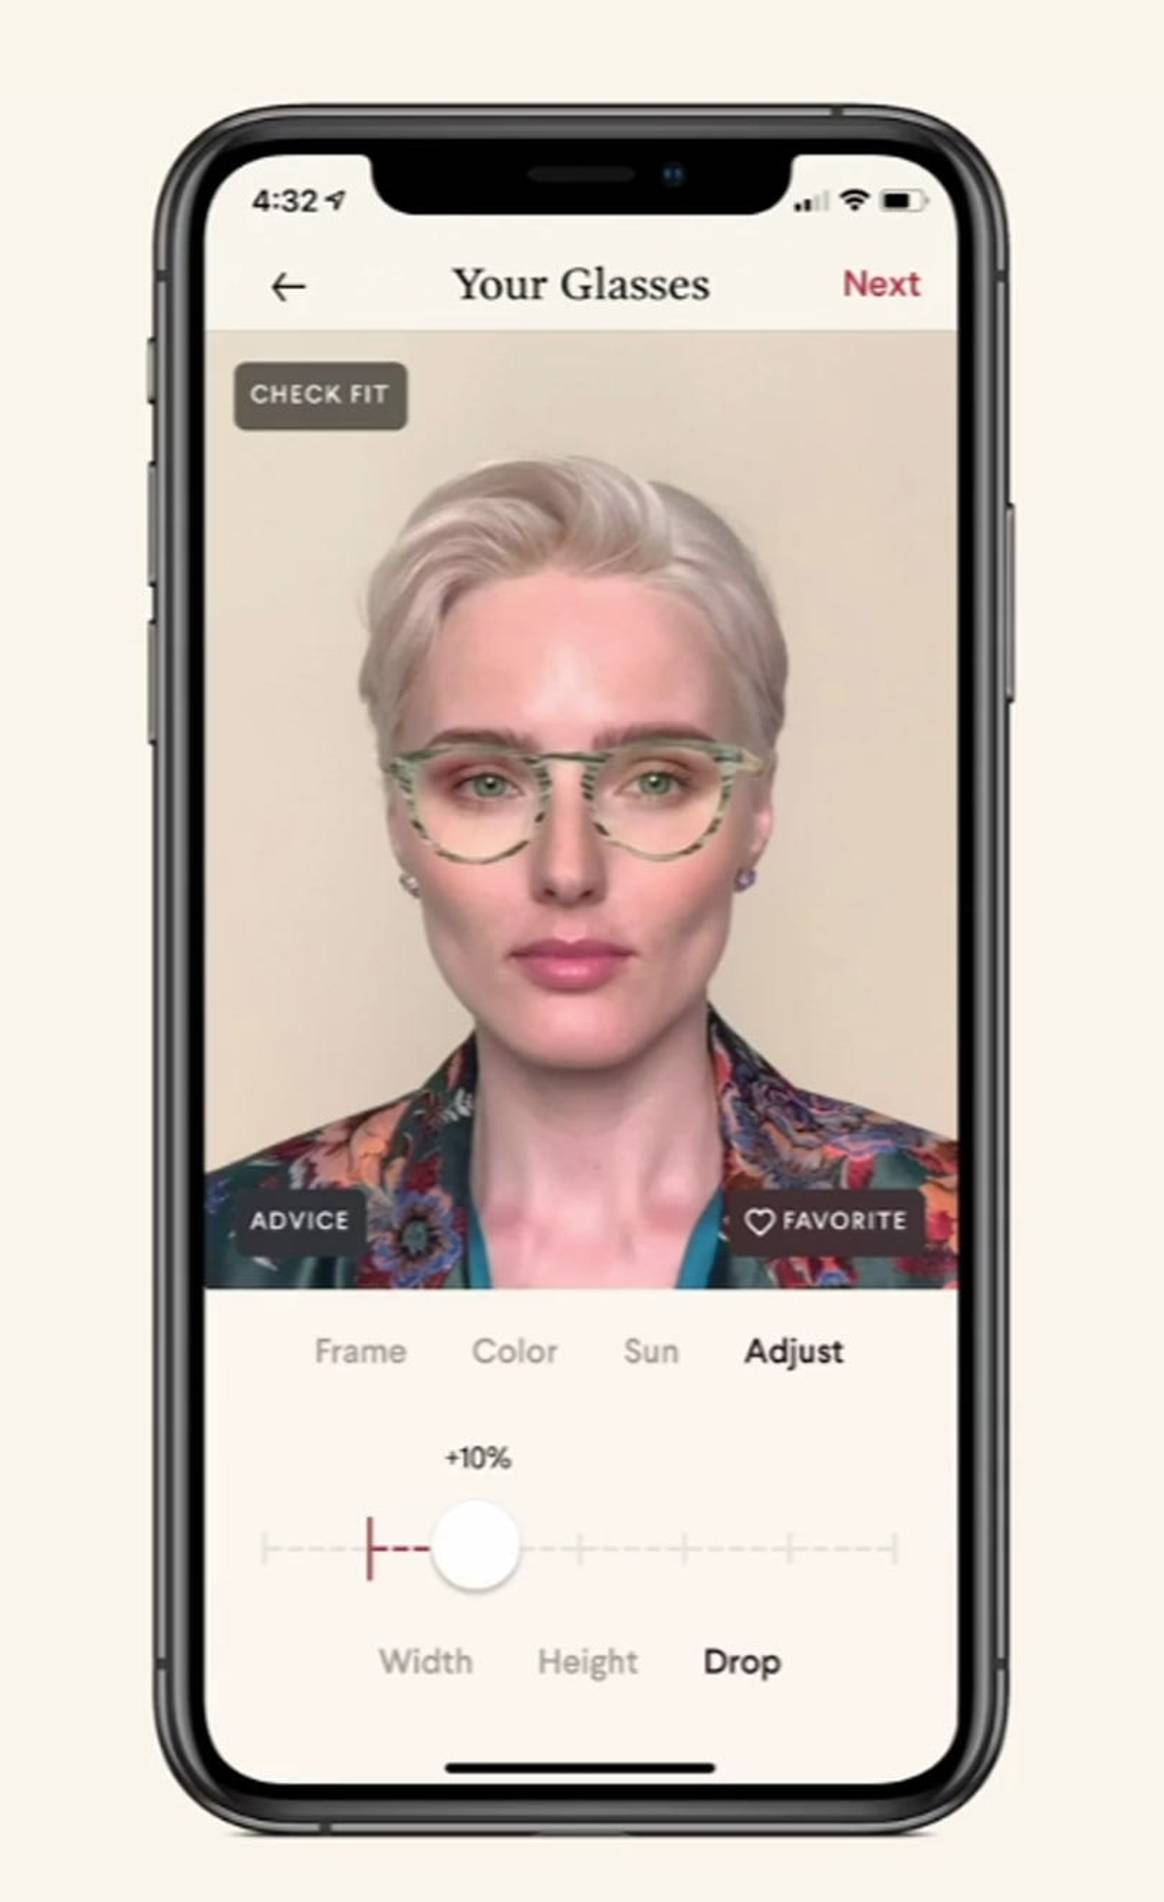 “Eyewear couture”: how Topology is using technology to address eyewear’s fit problem